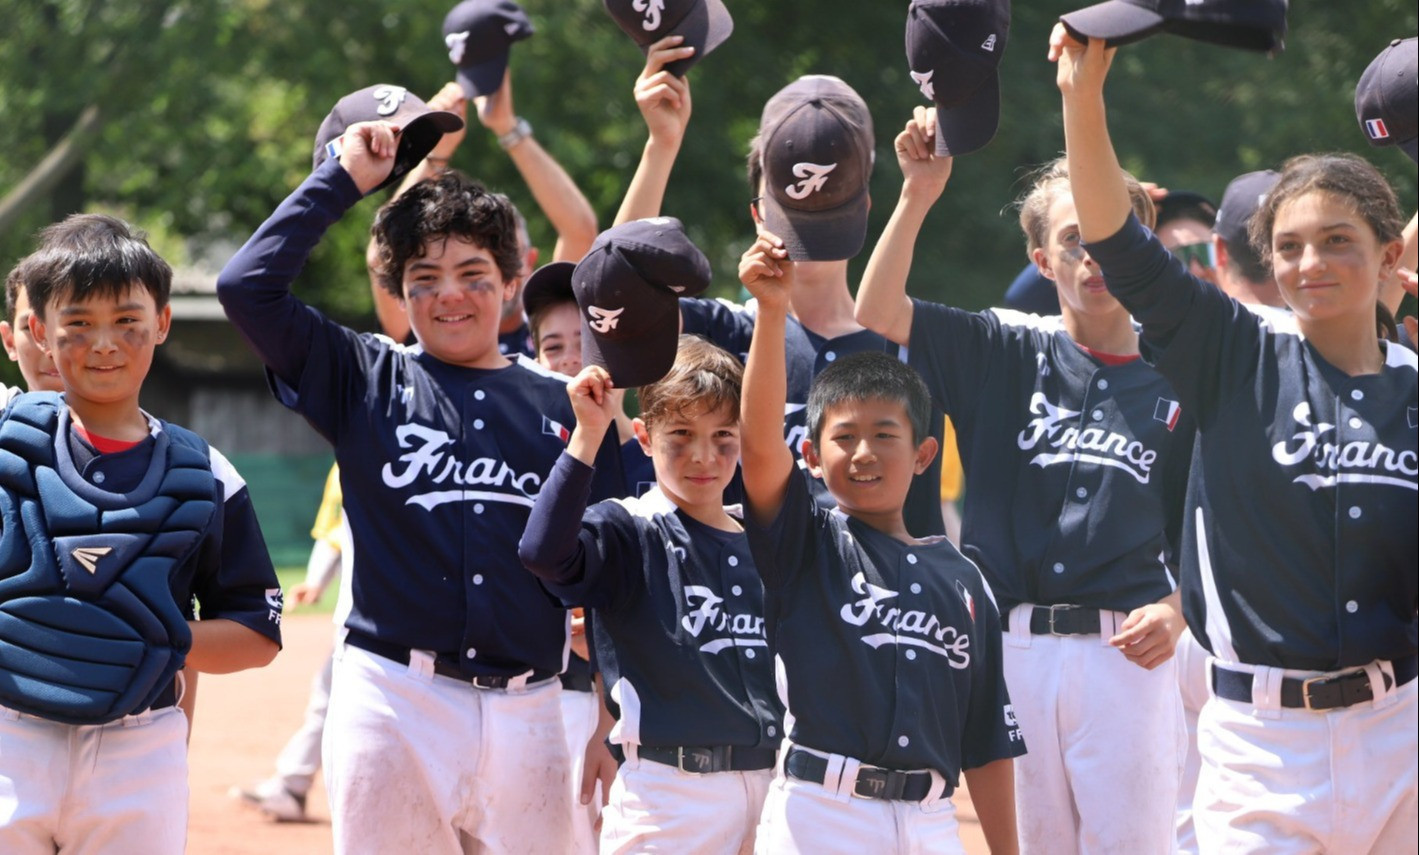 The number of registered baseball and softball players in France has risen to record heights, with participation levels rising most dramatically in the under-15 and under-12 categories ©WBSC